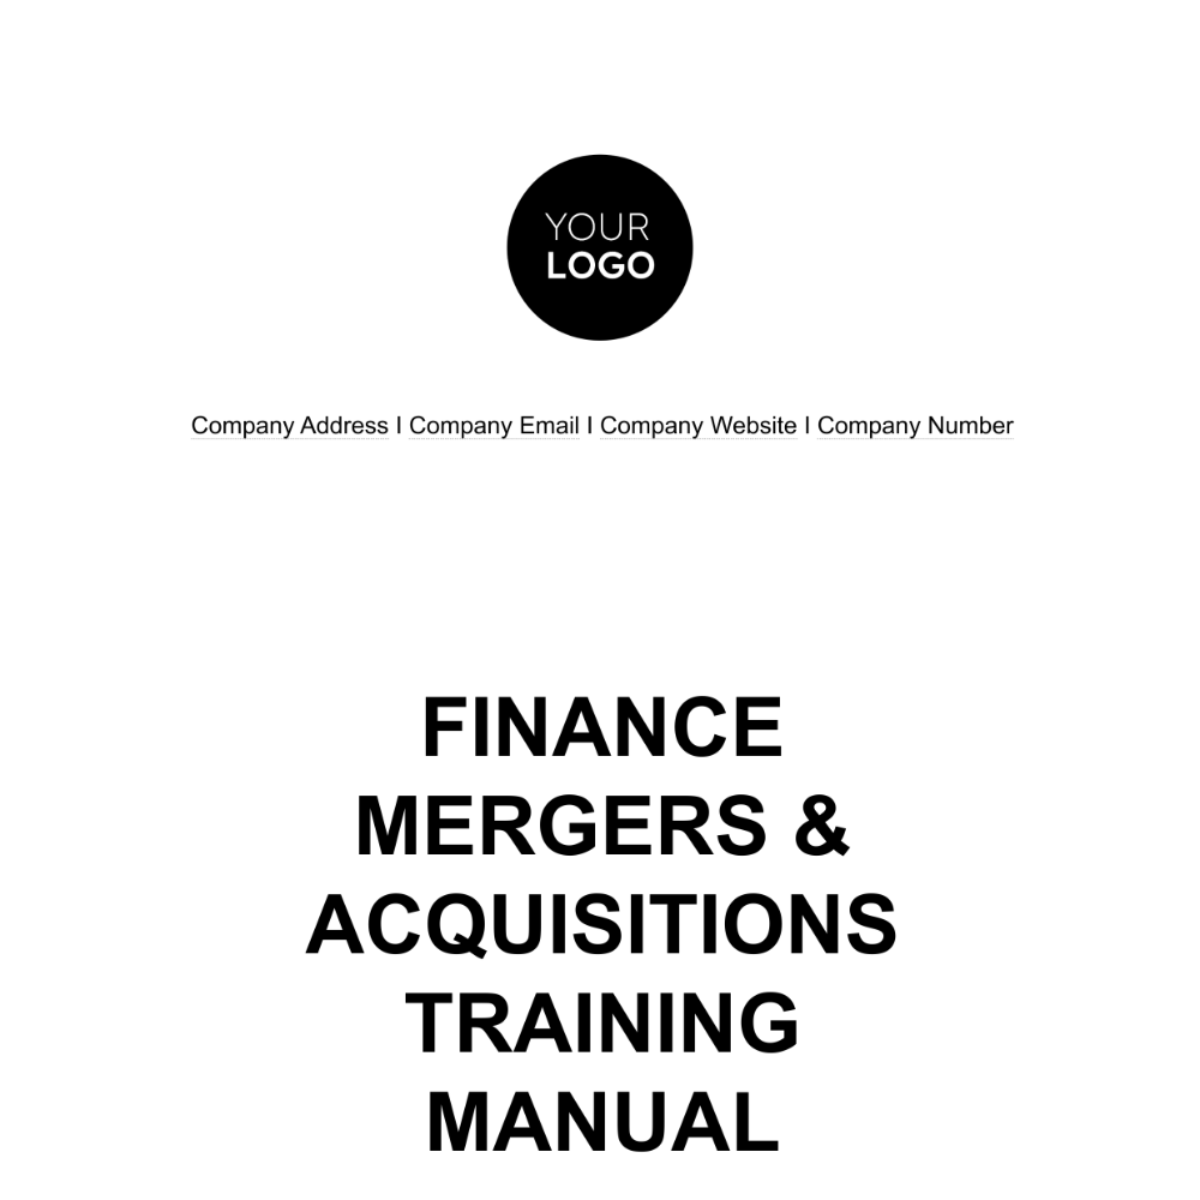 Finance Mergers & Acquisitions Training Manual Template